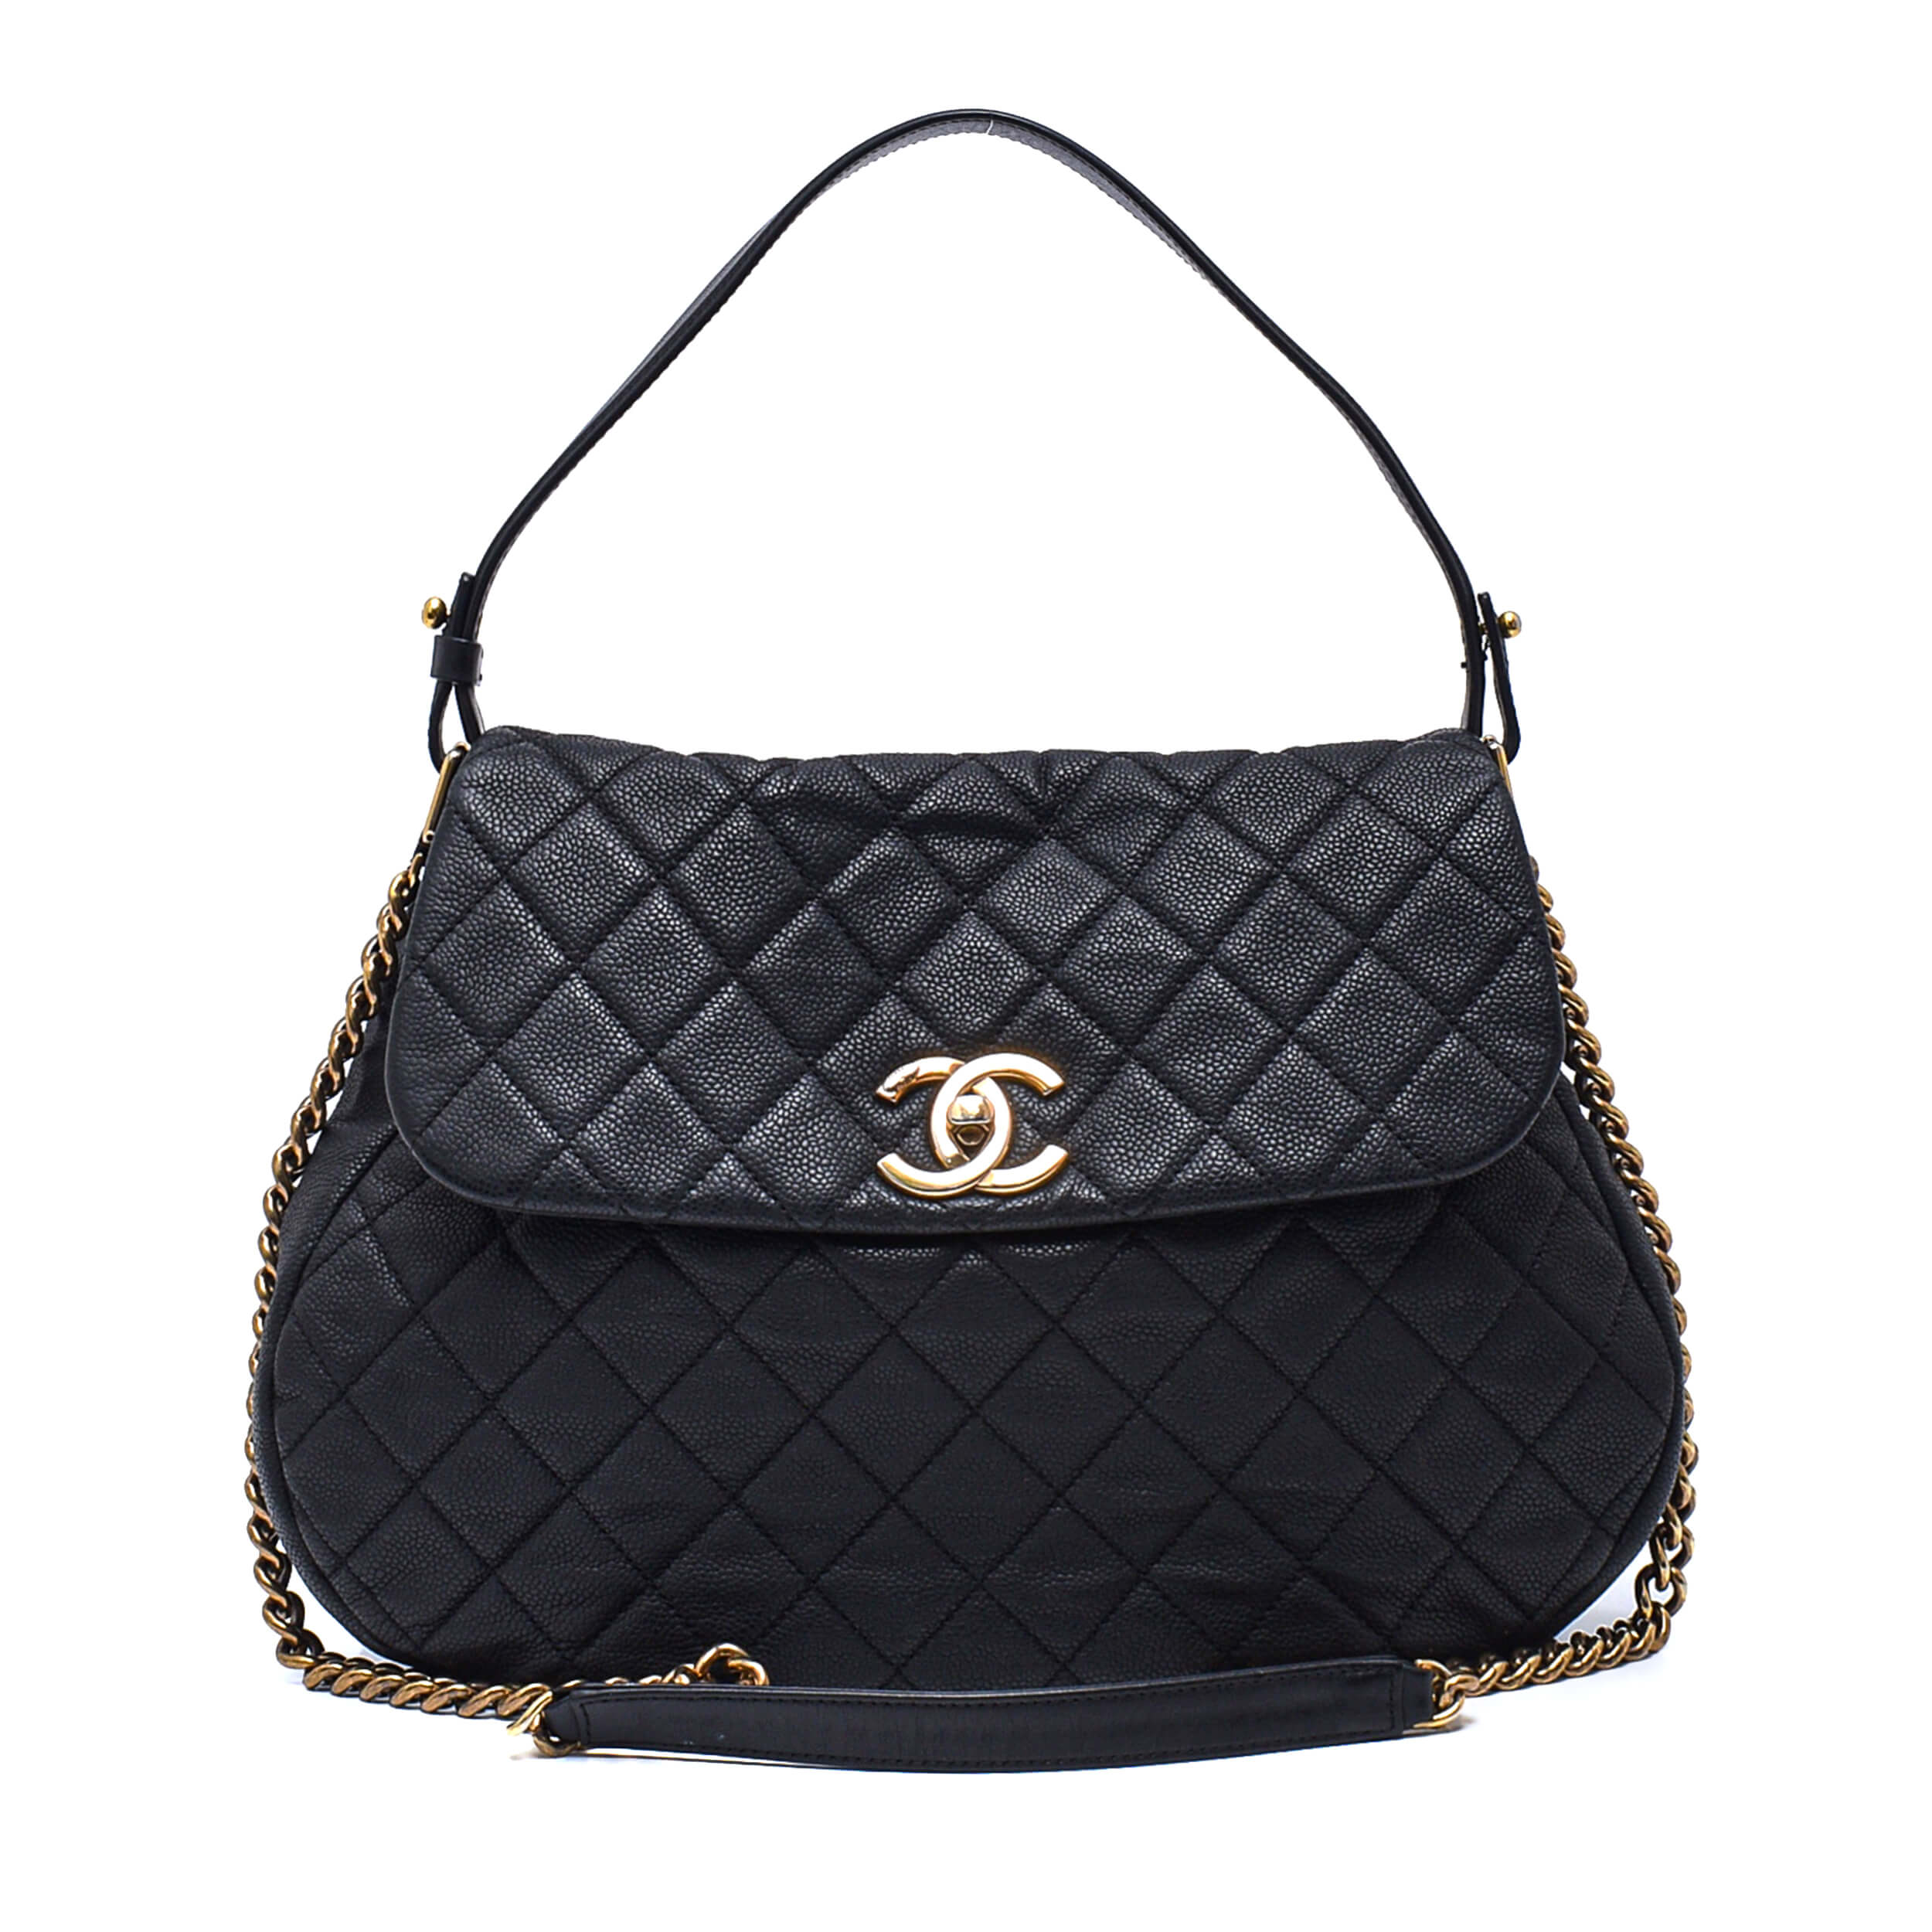 Chanel - Black Quilted Caviar Leather Country Chic Flap Messenger Bag